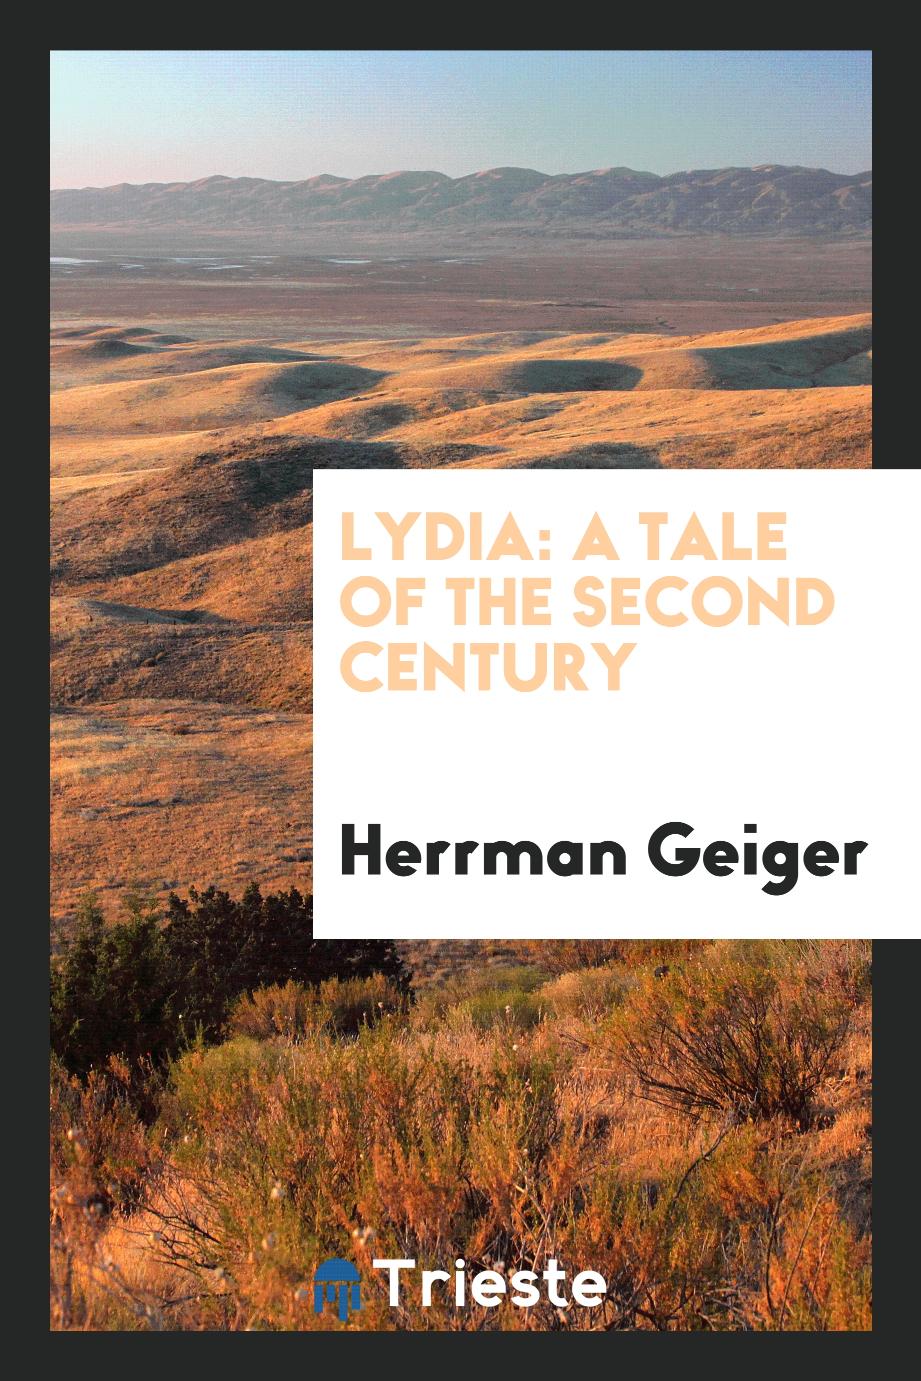 Lydia: a tale of the second century